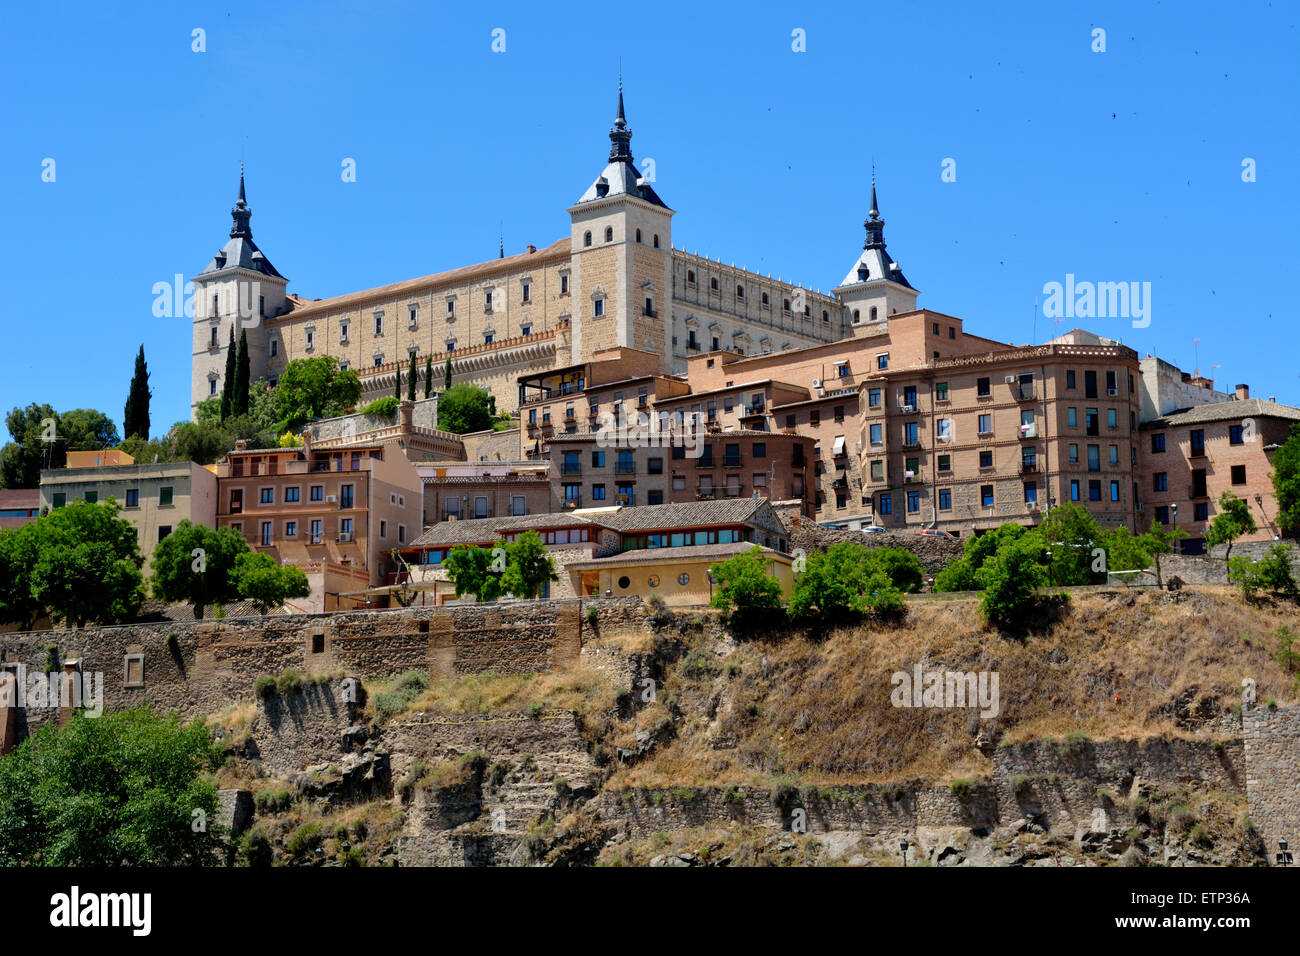 Looking up at the Alcazar building, Toledo, Spain Stock Photo